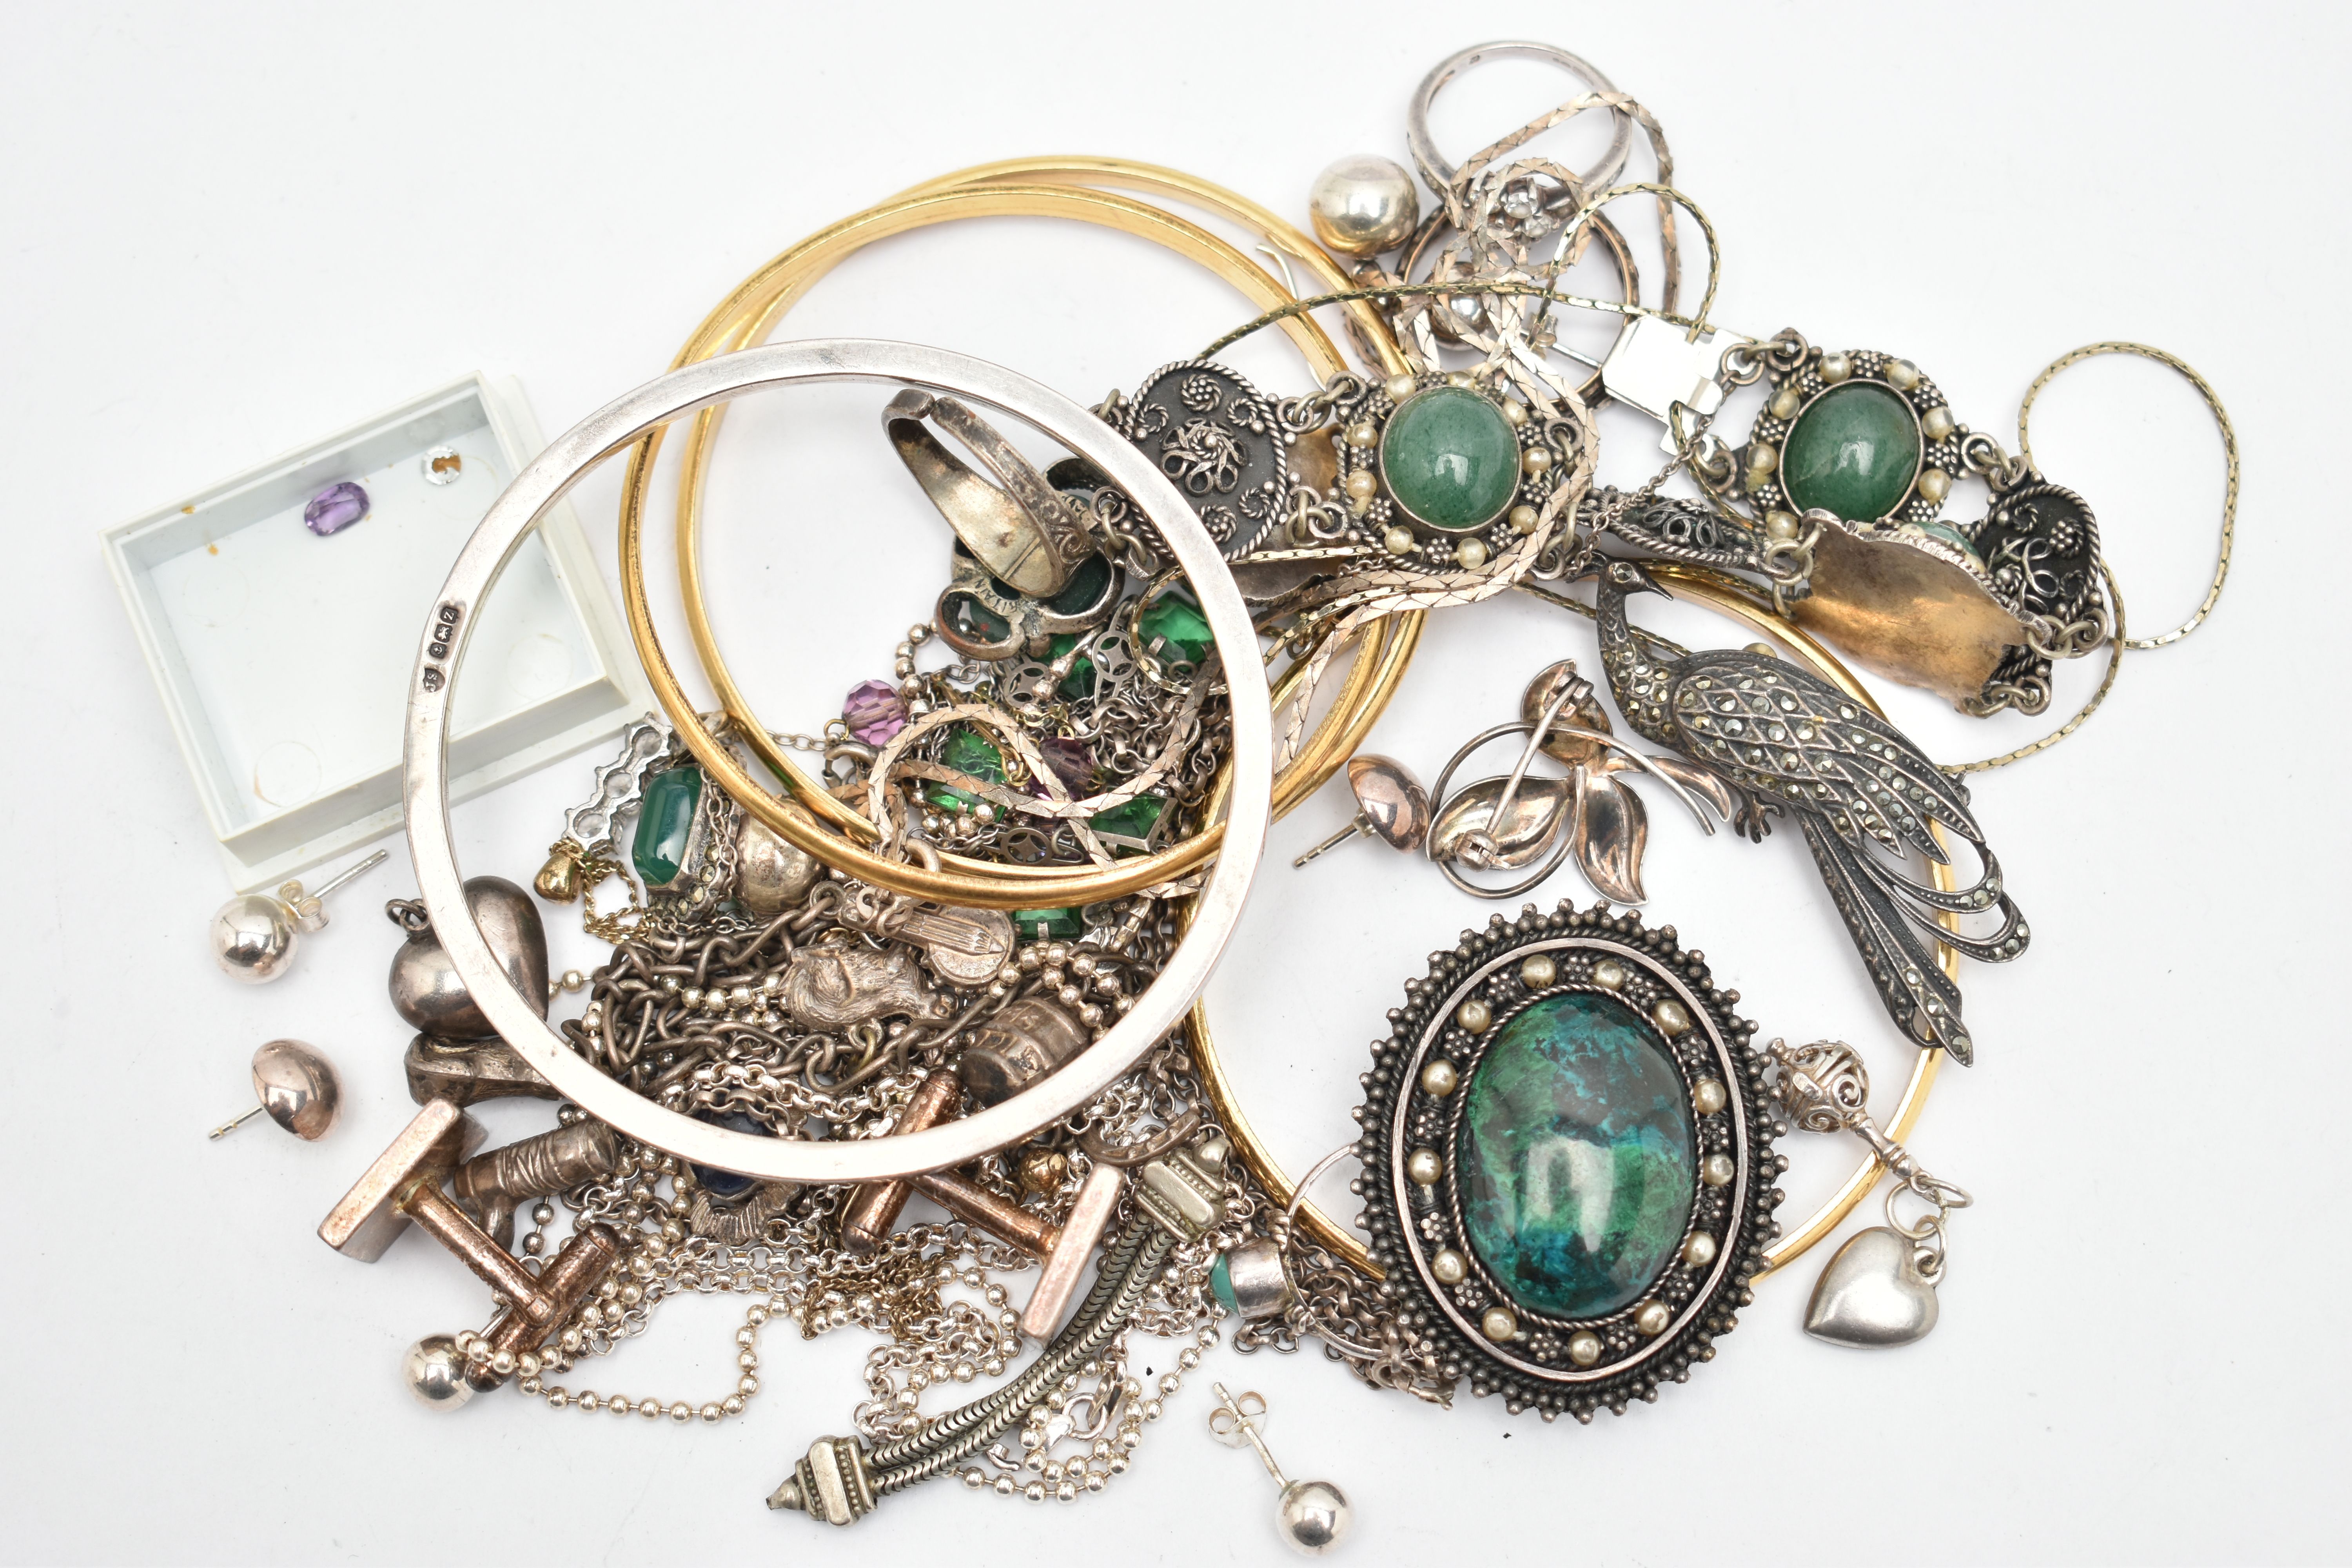 A SMALL BAG OF ASSORTED JEWELLERY, to include three rolled gold bangles, a silver bangle, hallmarked